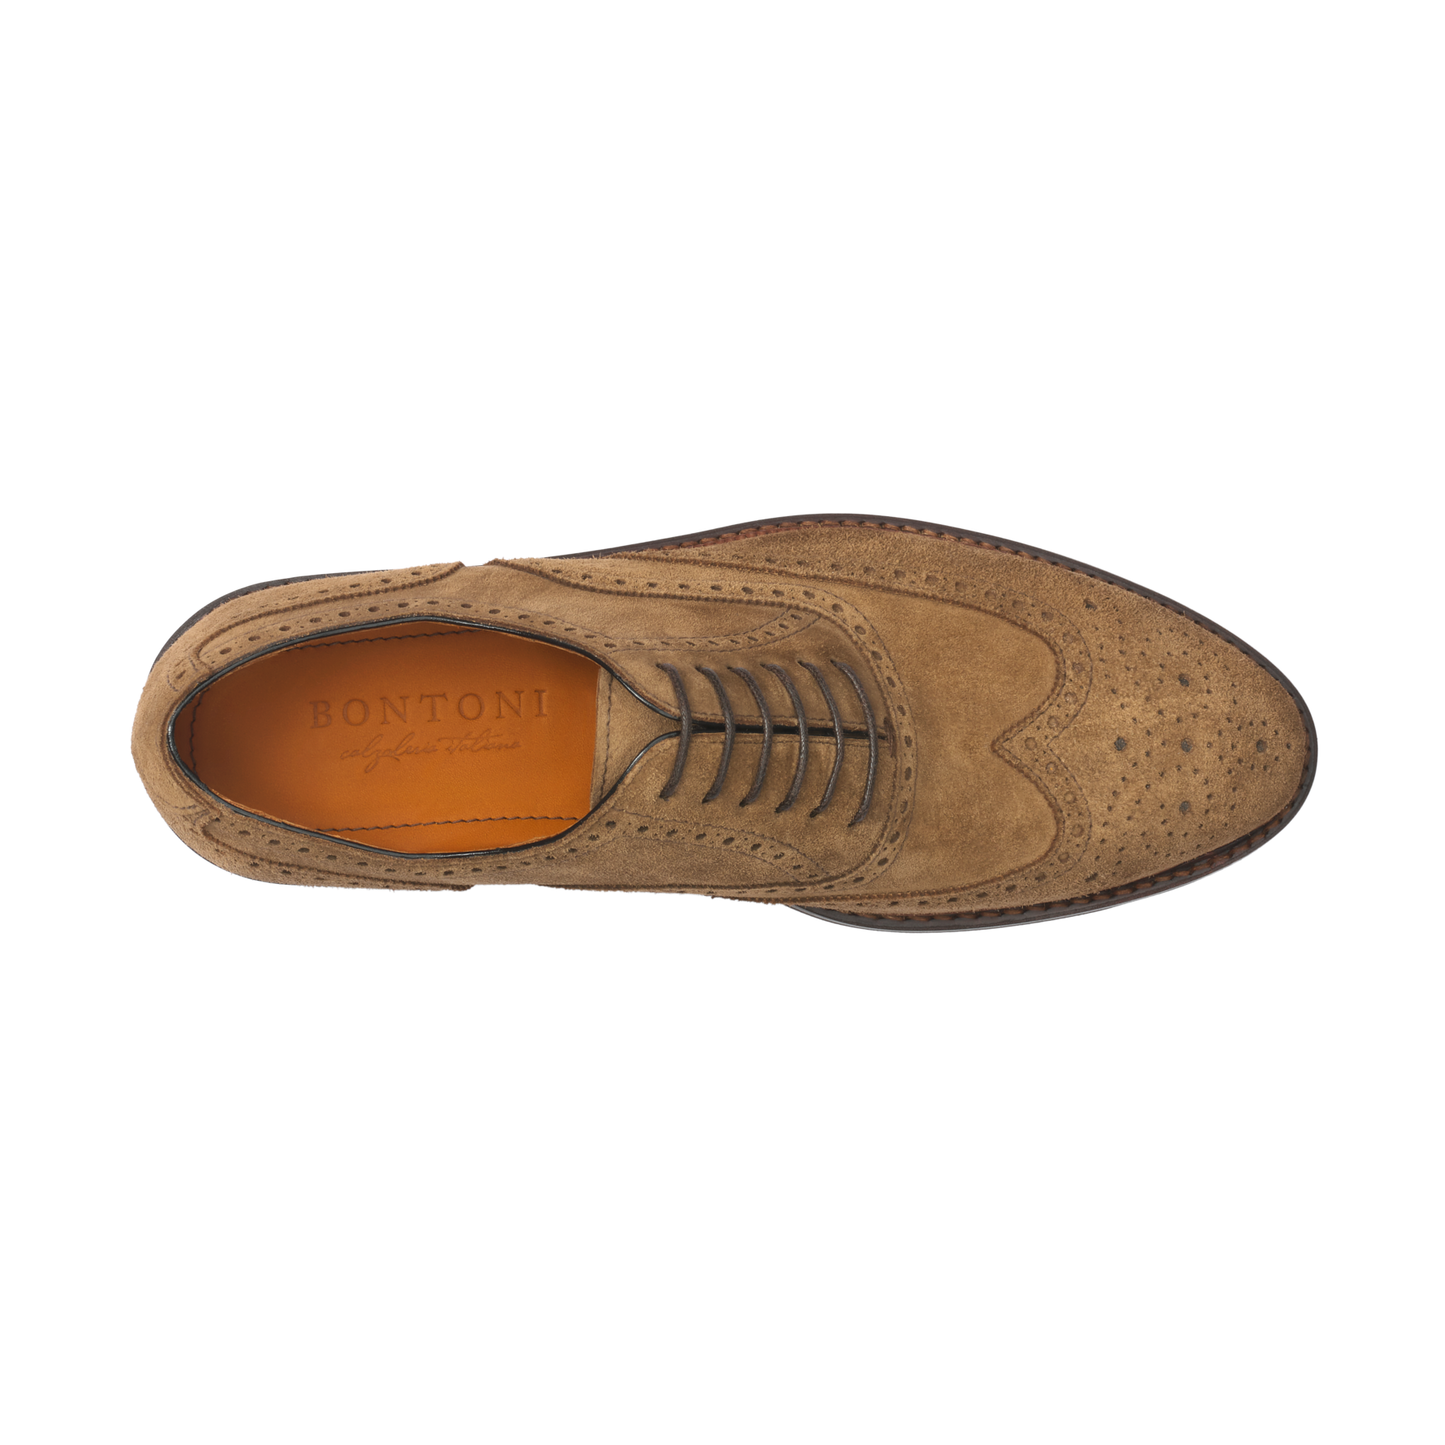 Bontoni «Libertino» Six-Eyelet Oxford Shoes with Perforated Details and Medallion in Brown - SARTALE